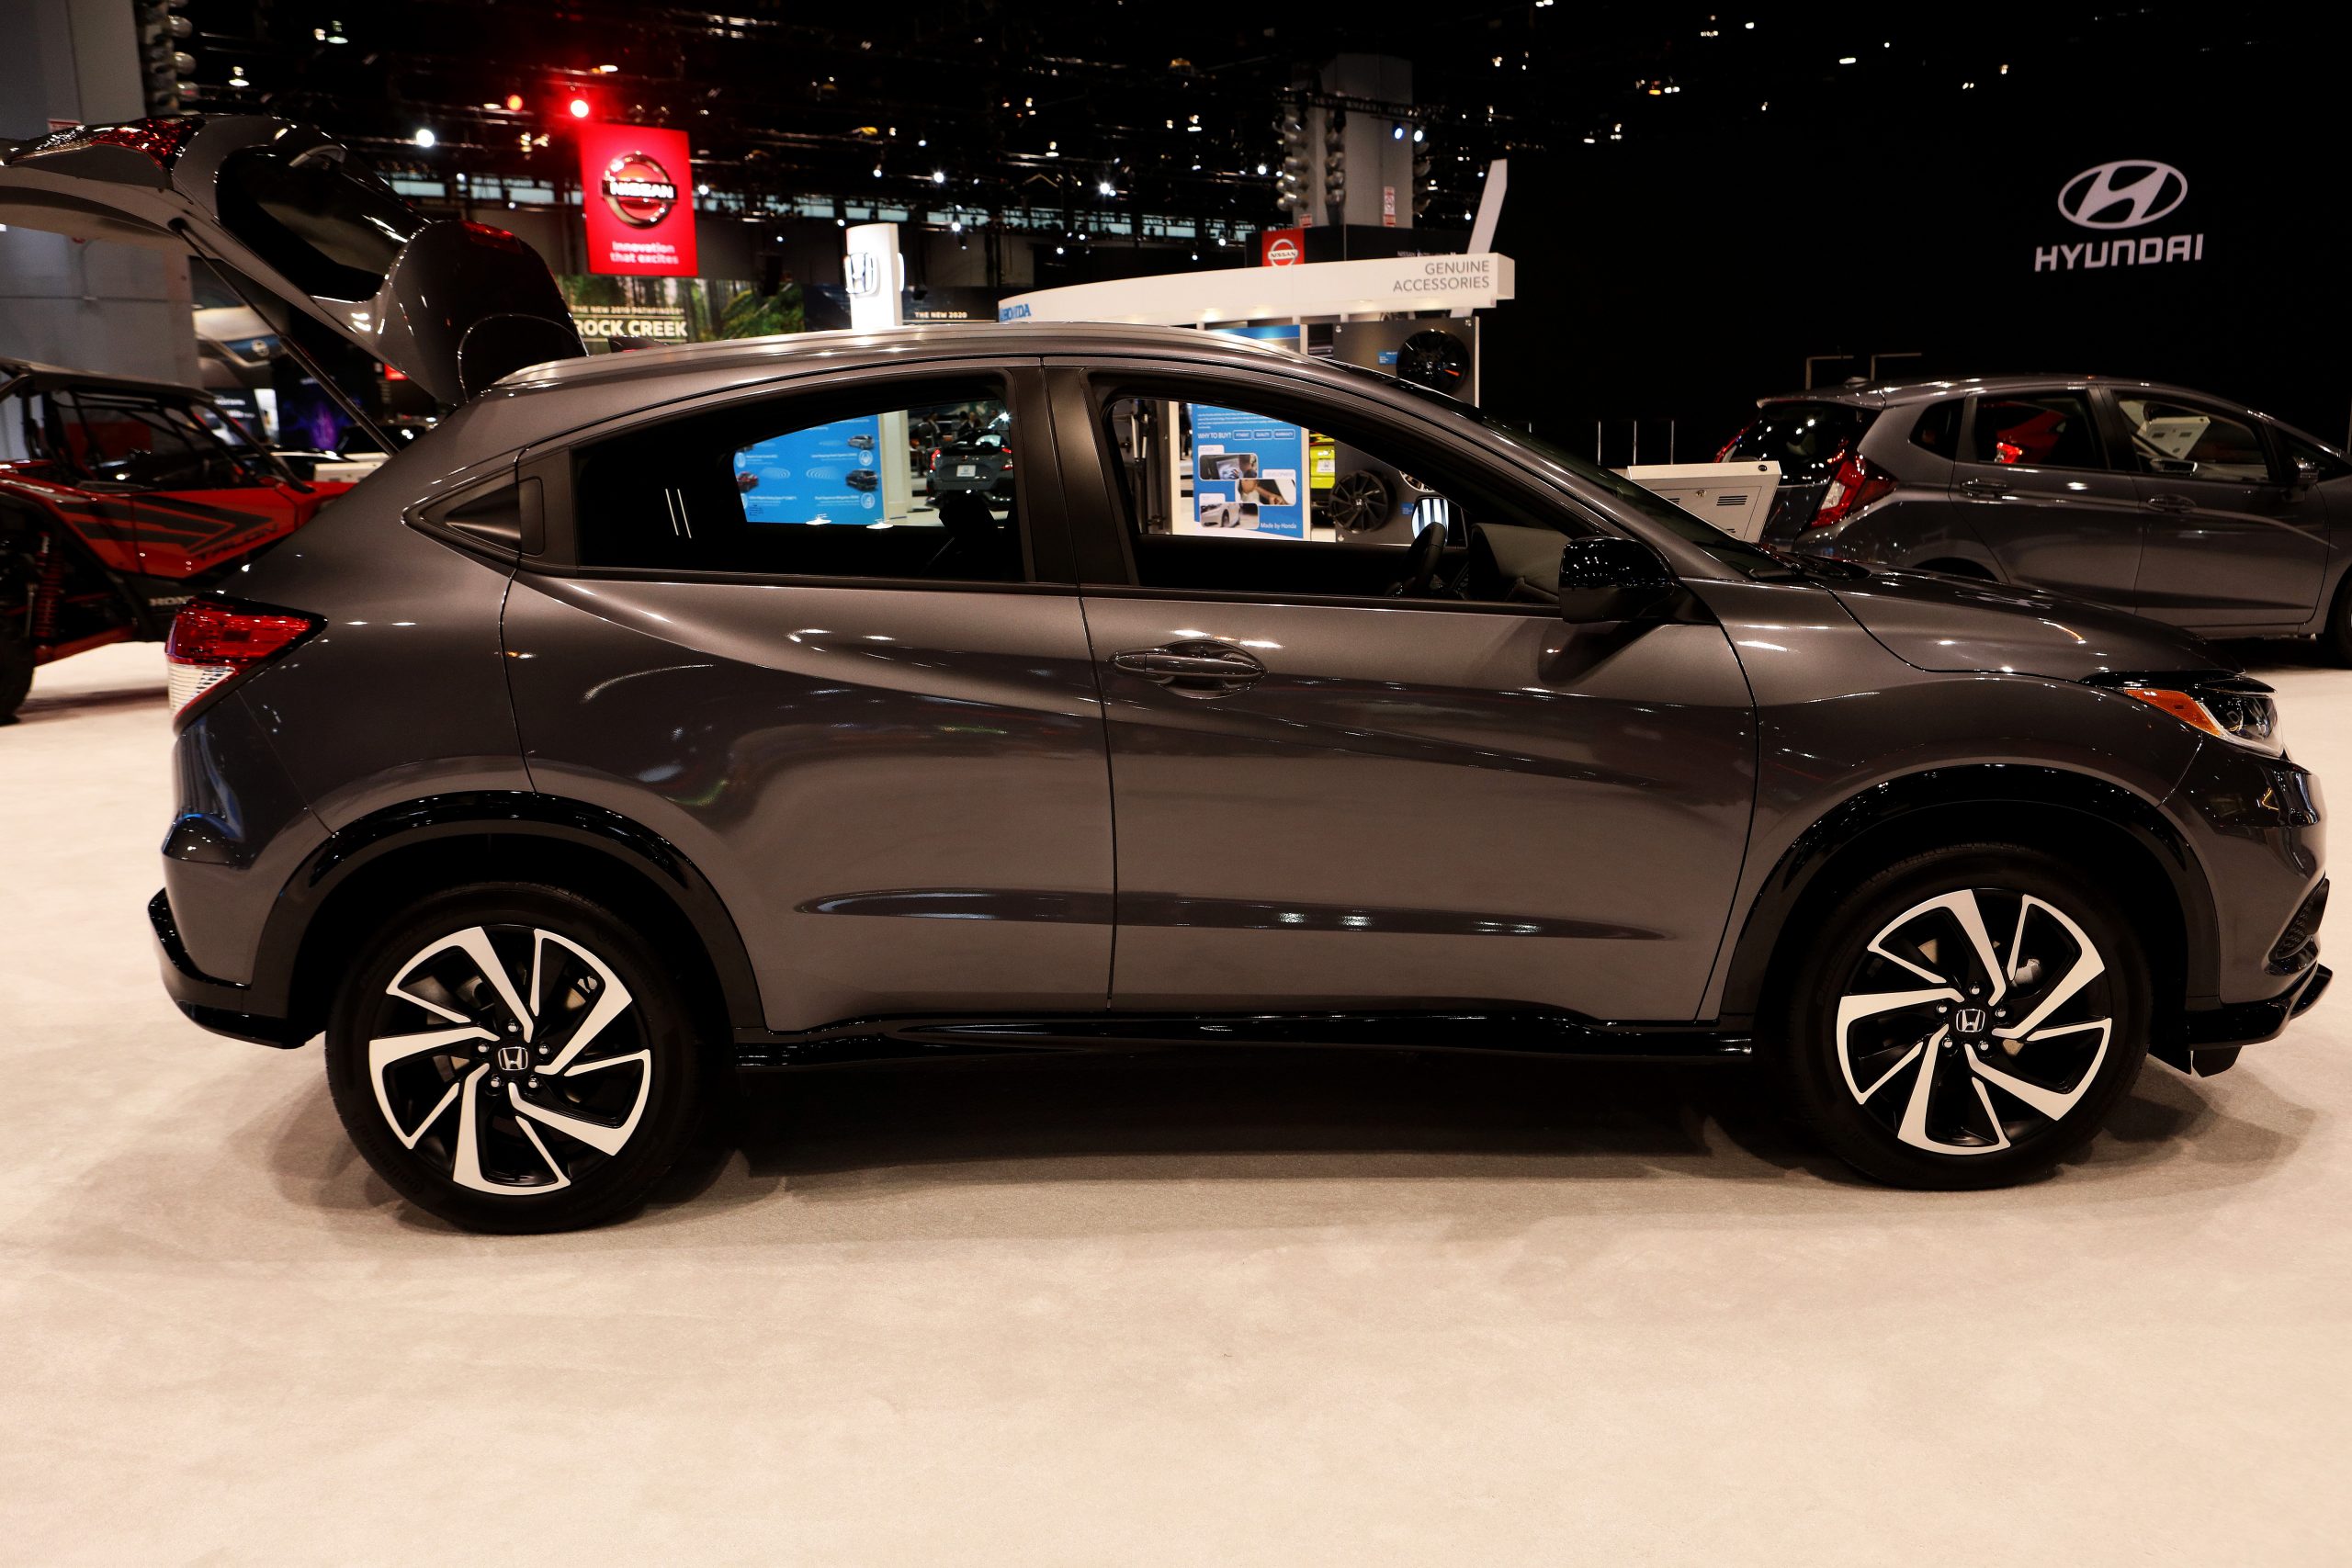 A Honda HR-V subcompact crossover SUV on display indoors is one of the least satisfying 2021 Honda models